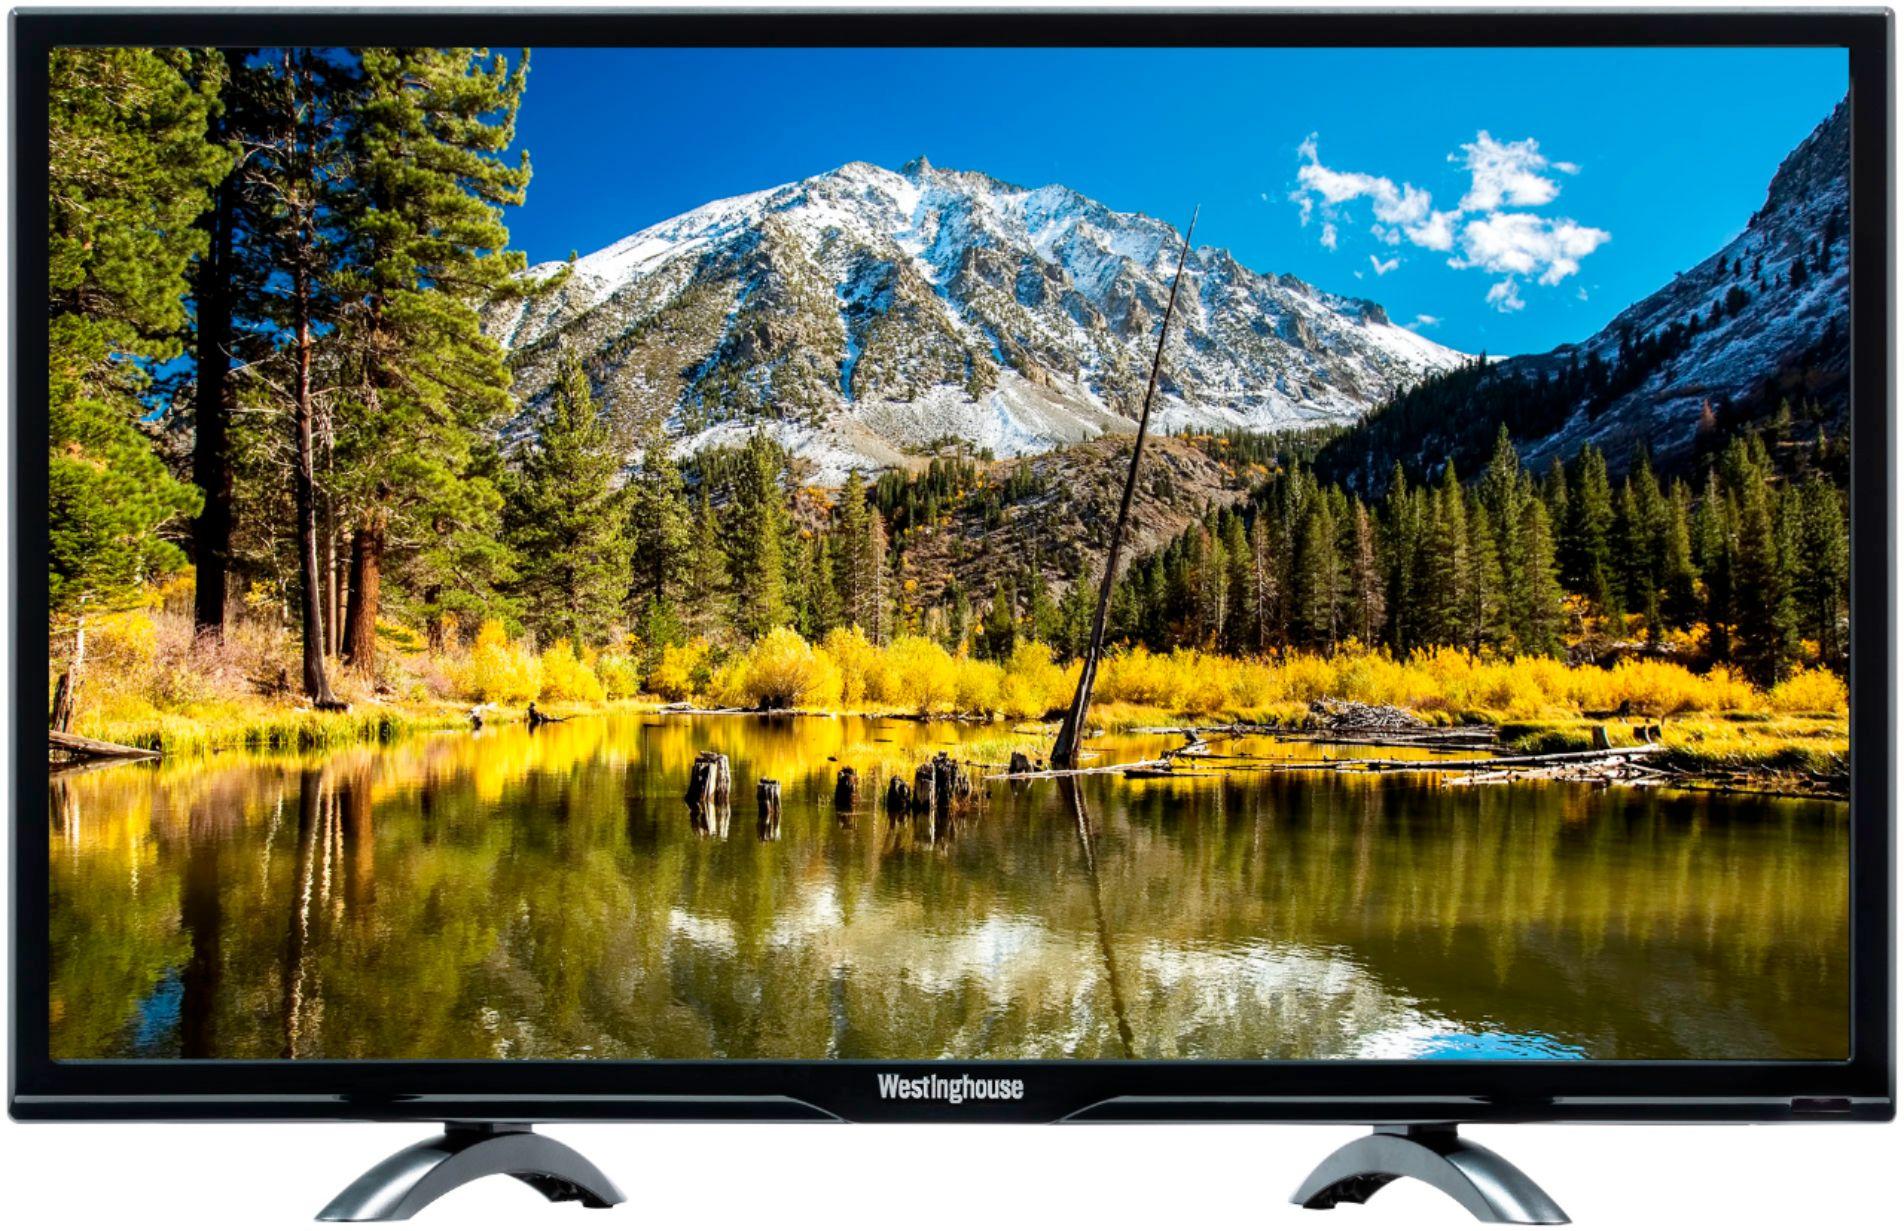 Westinghouse 24in 720p LED HDTV with DVD Player for $99.99 Shipped